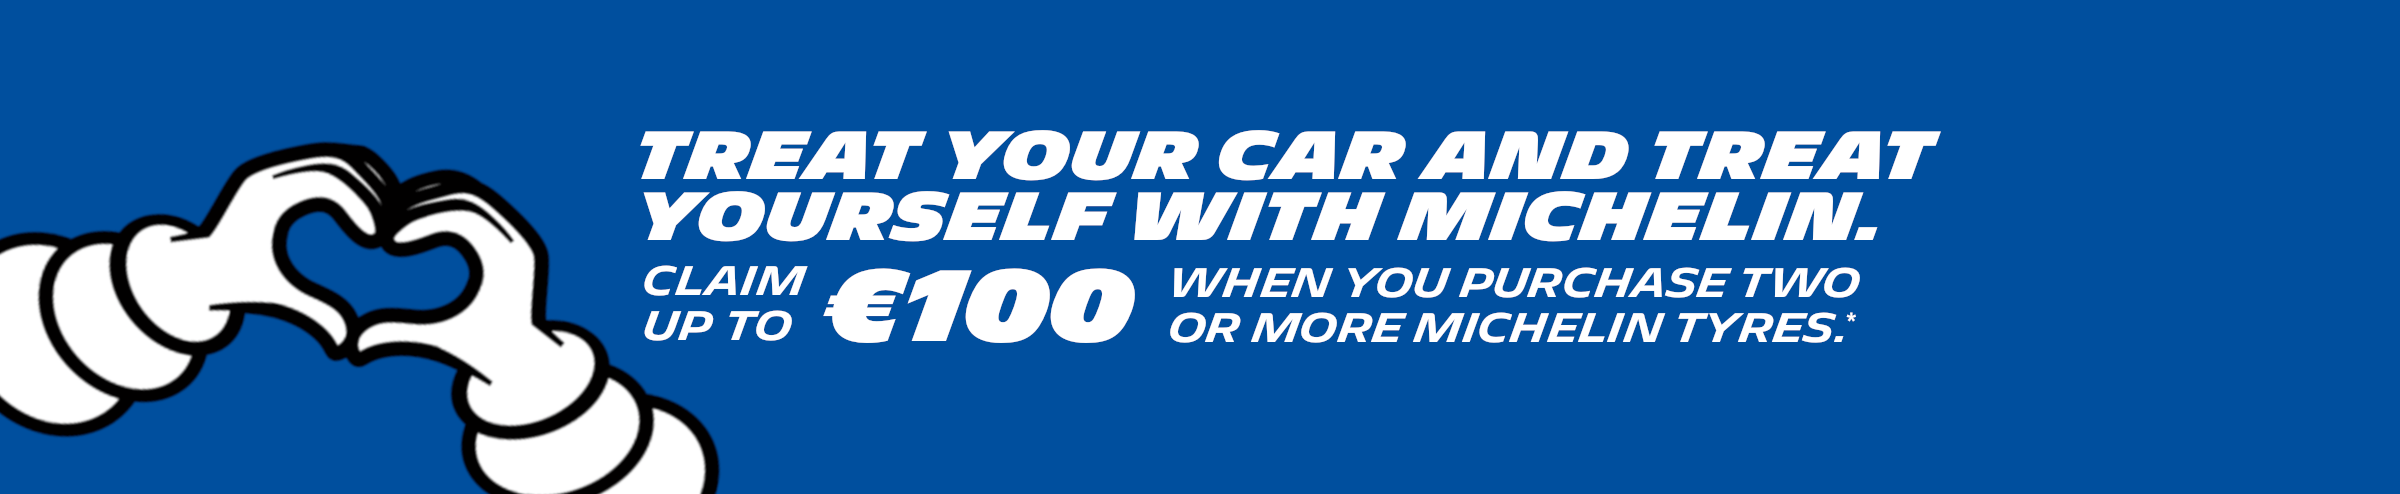 Treat your car and treat yourself with Michelin: Claim up to €100 when you purchase two or more Michelin tyres, terms and conditions apply.